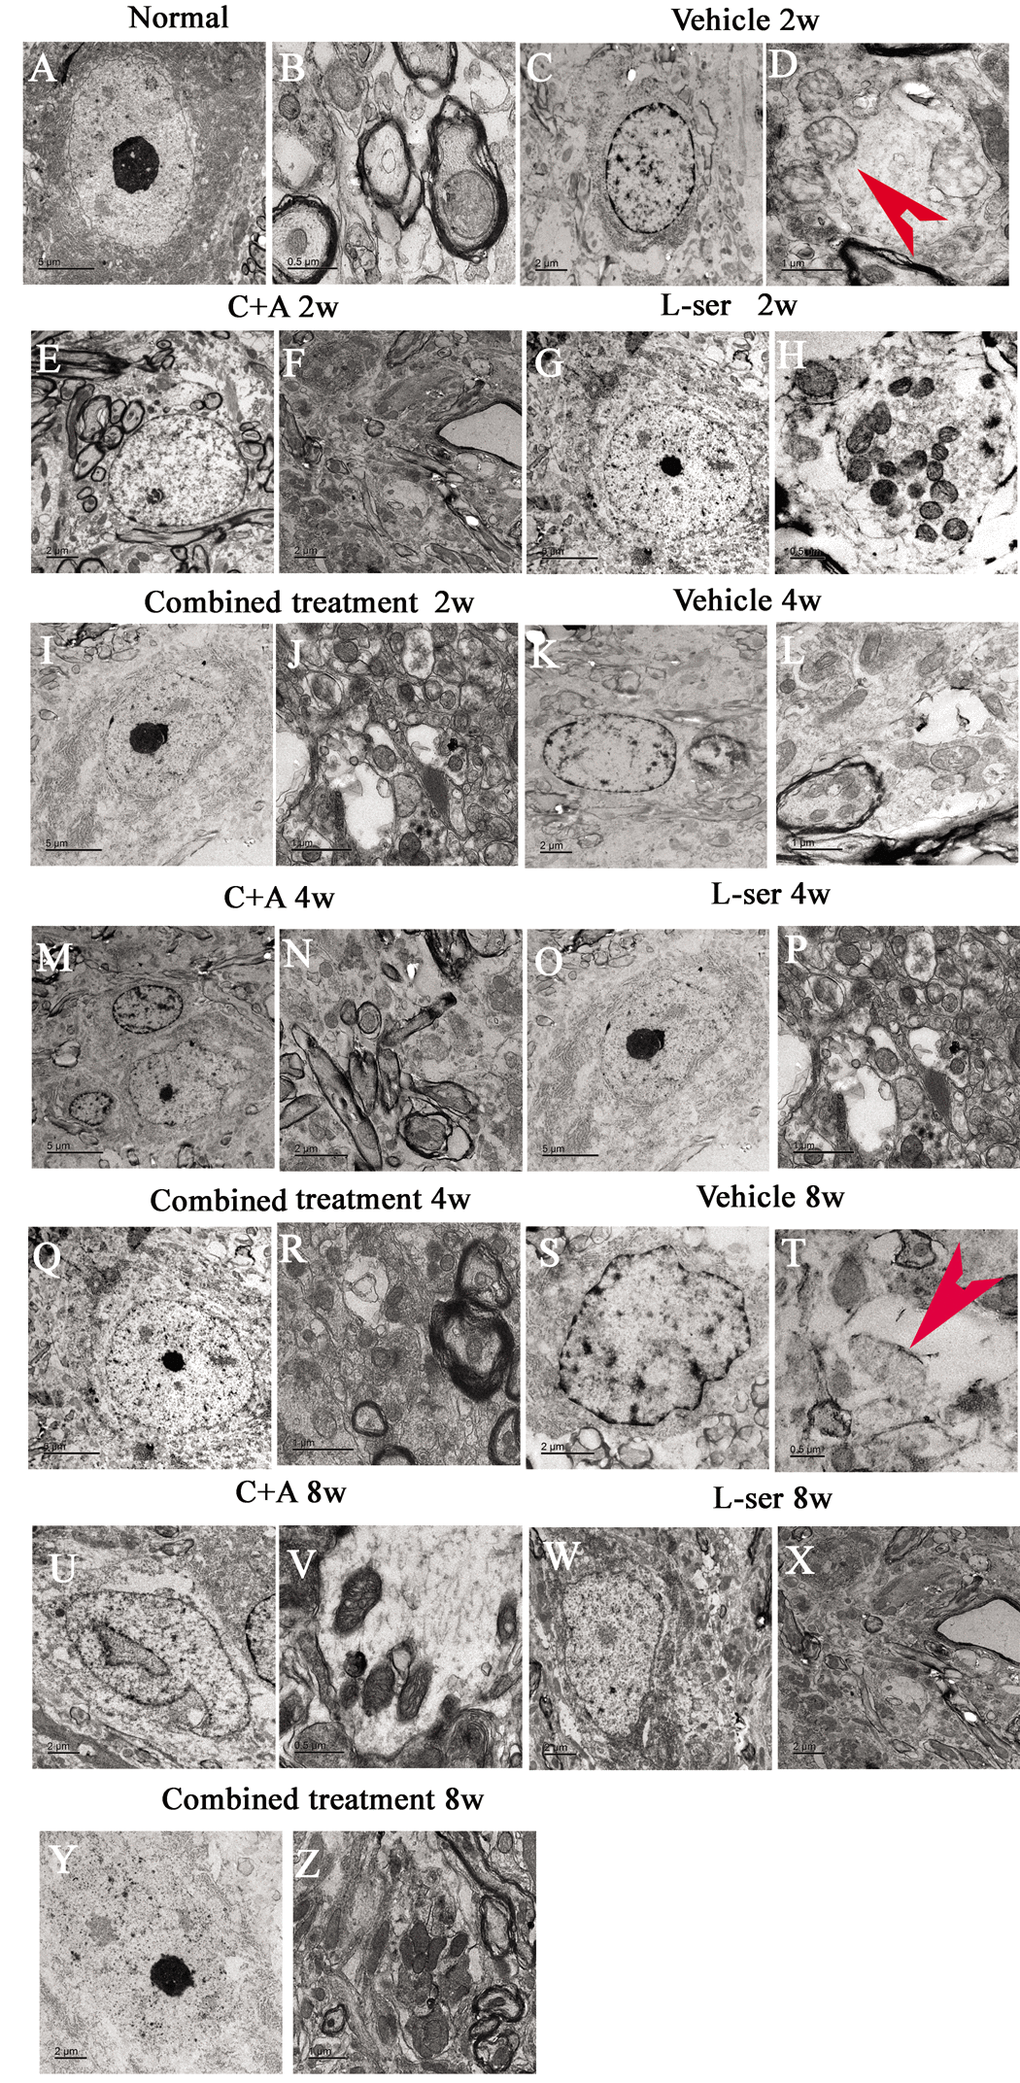 Representative electron micrographs showing mitochondrial atrophy, fragmented vacuoles, loose and fused alterations of the myelin sheath, and apoptotic features of the nuclei of spinal cord anterior horn motor neurons in the vehicle-treated model rats, as well as the attenuating effects of treatment with C16+Ang-1, L-serine, or both. (A–B) Rats in the control group showed (A) normal neuronal nuclei with uncondensed chromatin and (B) normal myelinated axons with dark, ring-shaped myelin sheaths surrounding the axons, with normal shaped mitochondria. (C-D, K-L, S-T) In vehicle-treated model rats 2–8 weeks after L-BMAA injection, fragmented vacuoles and loose and fused alterations on the myelin sheath were found, as well as mitochondrial malformations such as vacuolization and swollen cristae (arrows in D). At 8 weeks after L-BMAA injection (T), some mitochondria had a completely atrophied appearance, and their cristae had vanished. More drastic alterations in demyelination and axonal loss were found (L, T), and neurons also showed apoptotic features with a contracted nucleus and condensed, fragmented, and marginated nuclear chromatin (C, K, S). By contrast, in rats treated with C16+Ang-1(E-F, M-N, U-V), L-serine (G-H, O-P, W-X), and both (I-J, Q-R, Y-Z), newly formed myelin sheaths were observed surrounding the intact axons, and the morphology of mitochondria and nuclei were relatively normal. This was particularly obvious in the group that received the combined treatment (Y, Z). (B, H, T, V) Scale bar = 500 nm; (D, J, L, P, R, Z) scale bar = 1 μm; (C, E, F, K, N, S, U, W, X, Y) scale bar = 2 μm; (A, G, I, M, O, Q) scale bar = 5 μm.